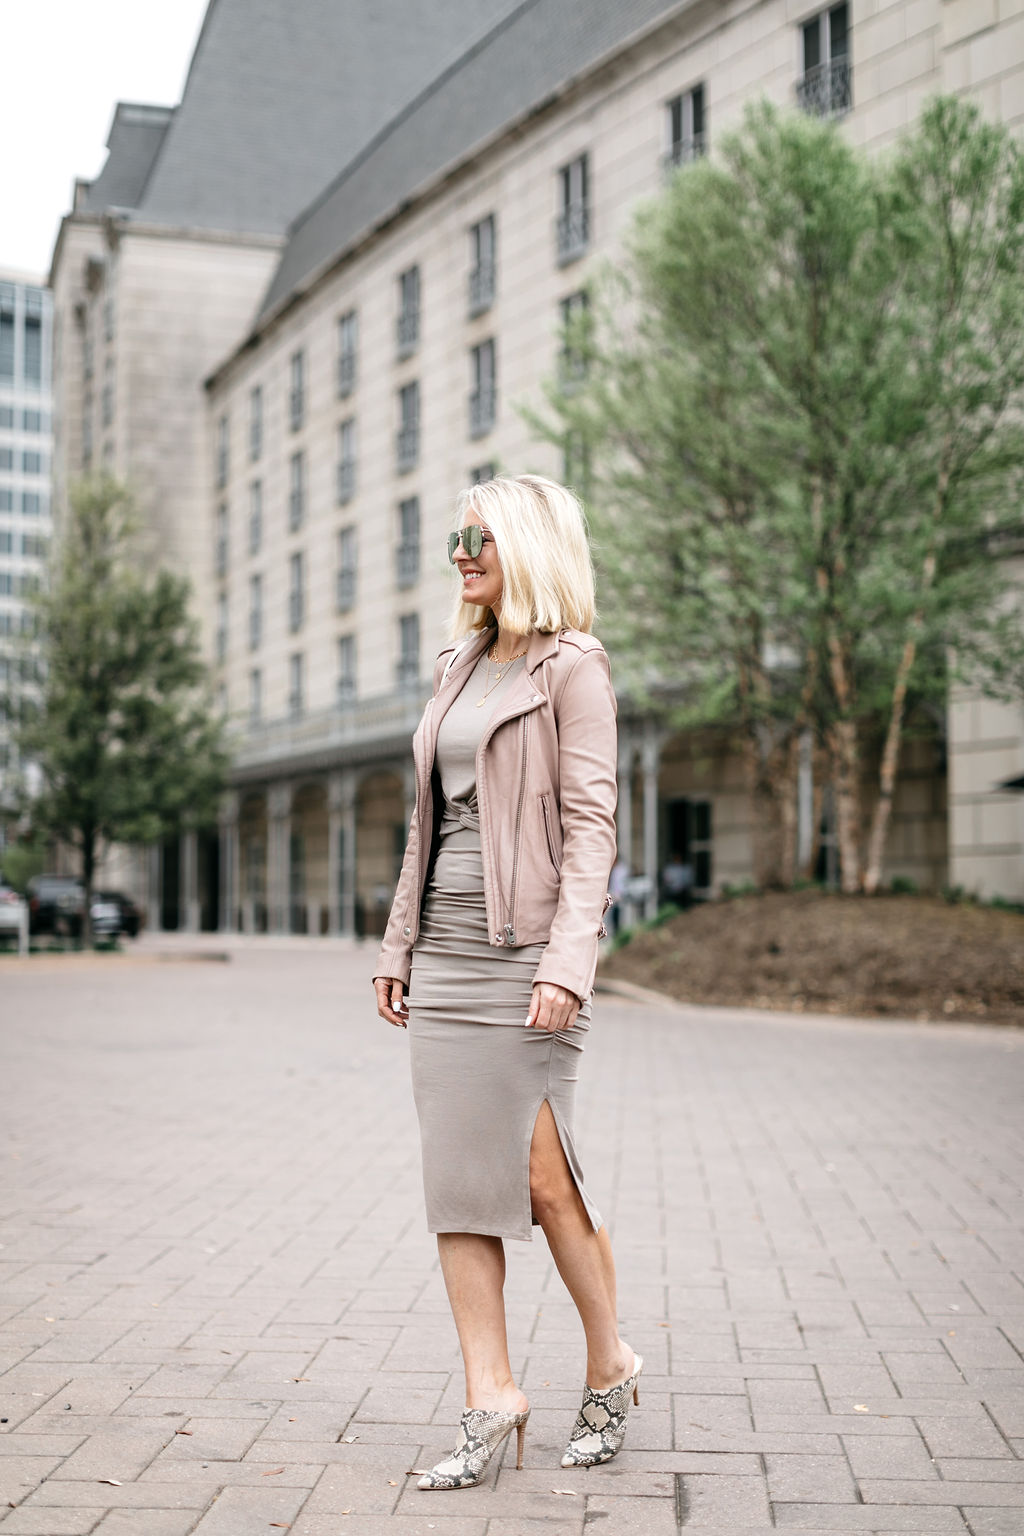 Reward Style Conference 2019, Fashion blogger over 40 Erin Busbee of BusbeeStyle.com wearing a fitted cropped long sleeve top and fitted midi skirt by Made LA from Revolve in Dallas, Texas